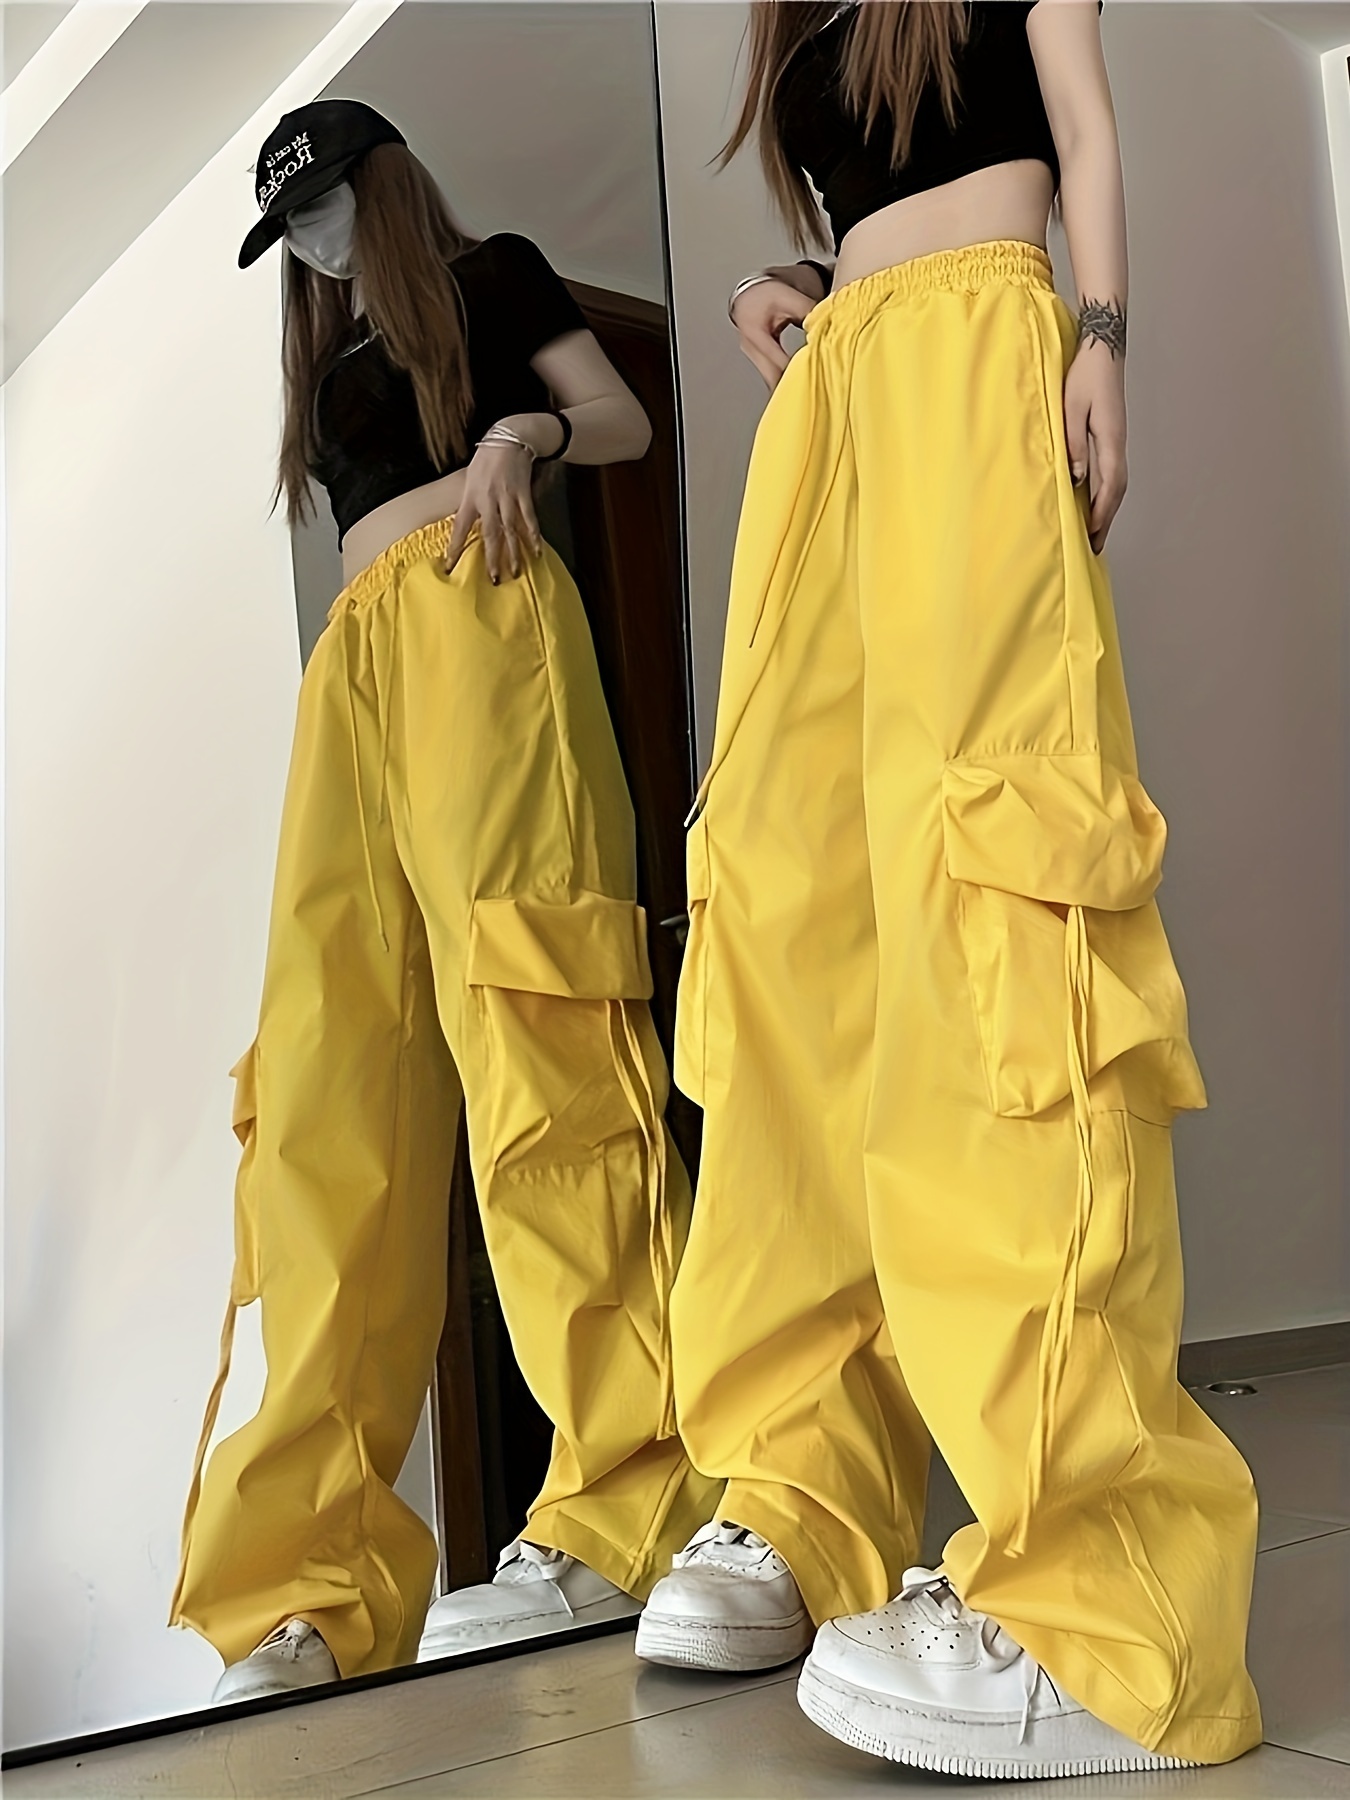 Baggy Pants Outfit Ideas 😍 Click the yellow bag to order